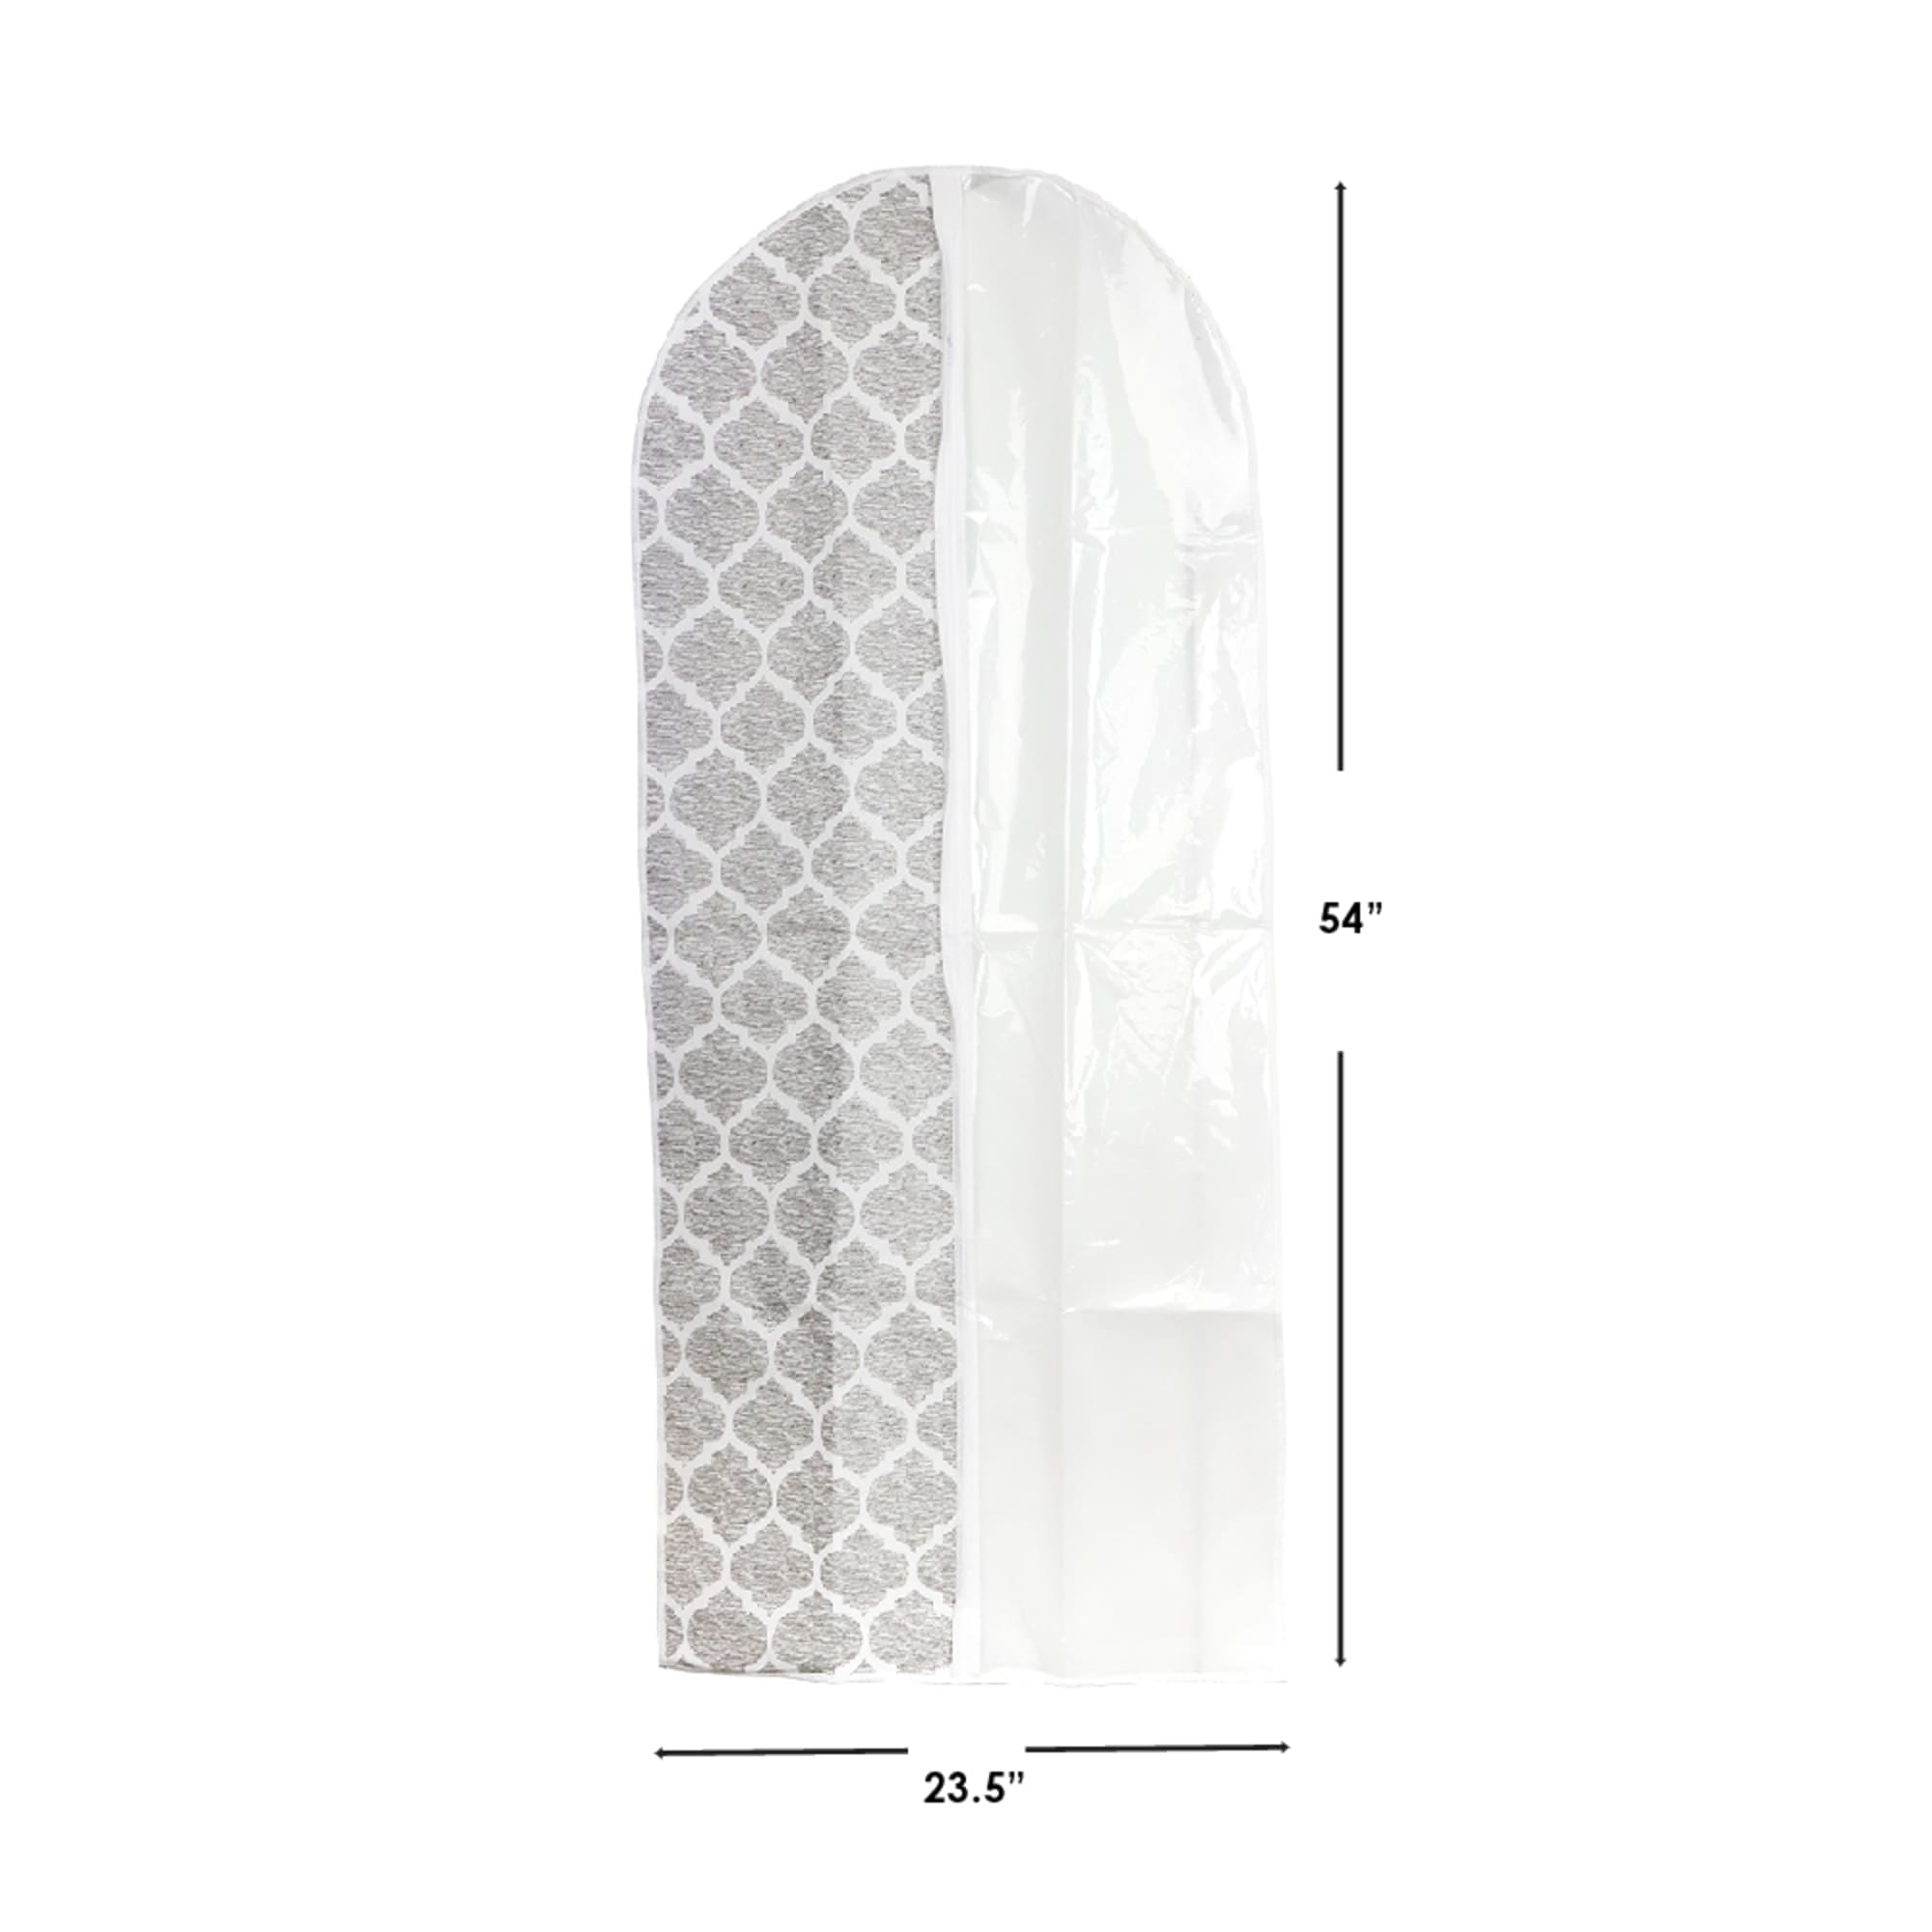 Home Basics Arabesque Non-Woven Garment Bag with Clear Plastic Panel, White $3.00 EACH, CASE PACK OF 12